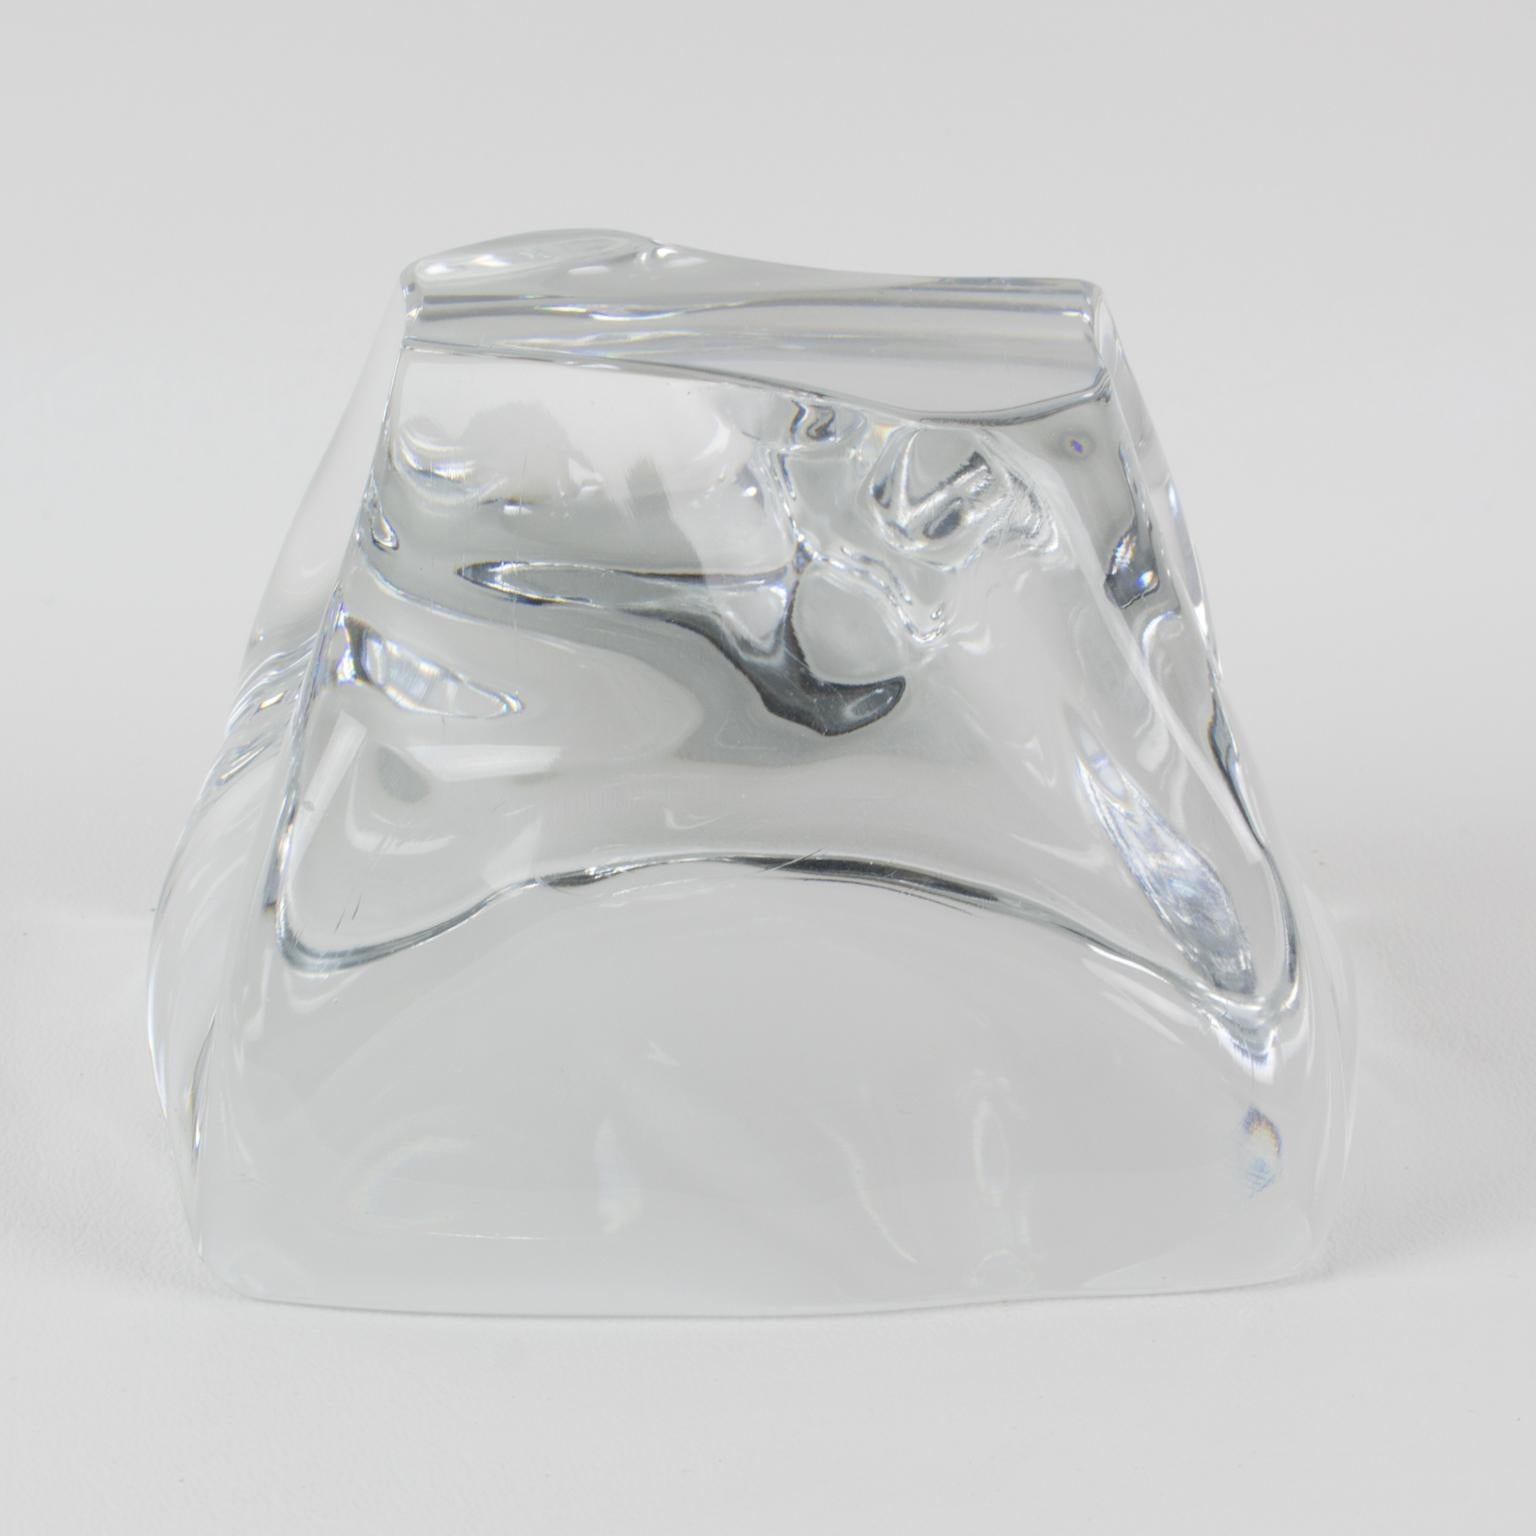 Mid-20th Century Daum France Crystal Desktop Accessory Paperweight Sculpture For Sale